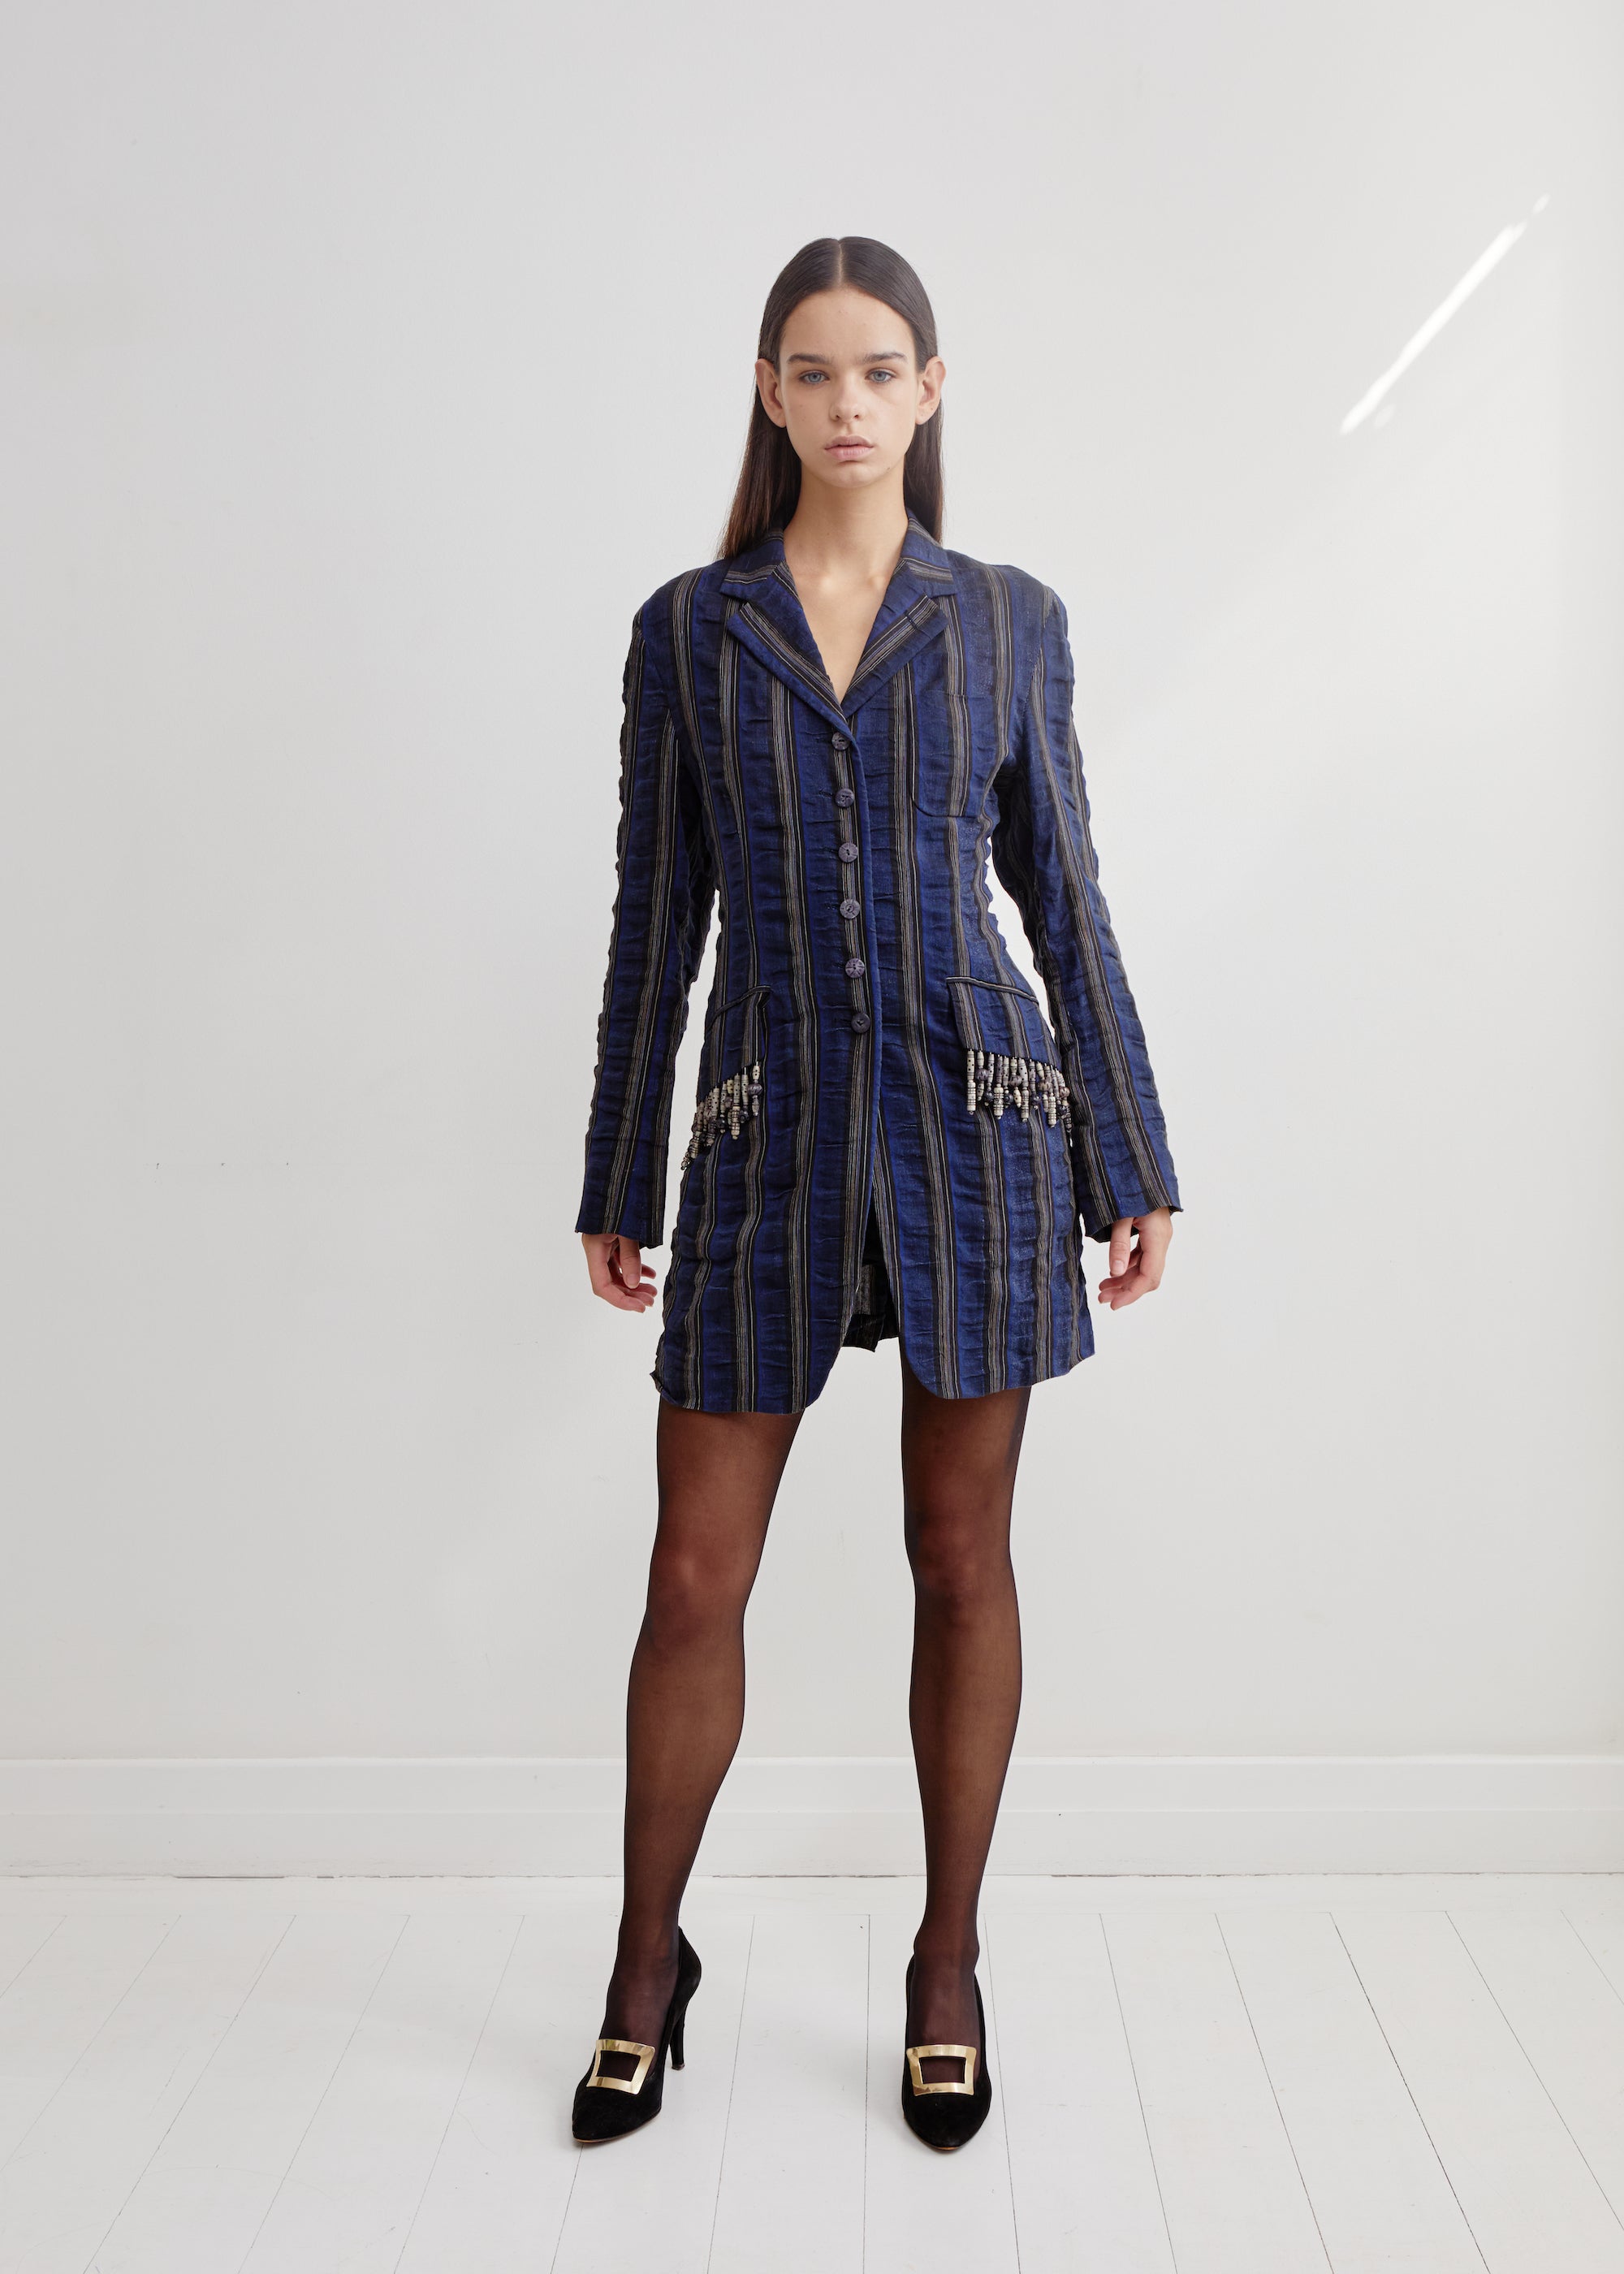 Romeo Gigli <br> S/S 1994 runway striped beaded long line jacket